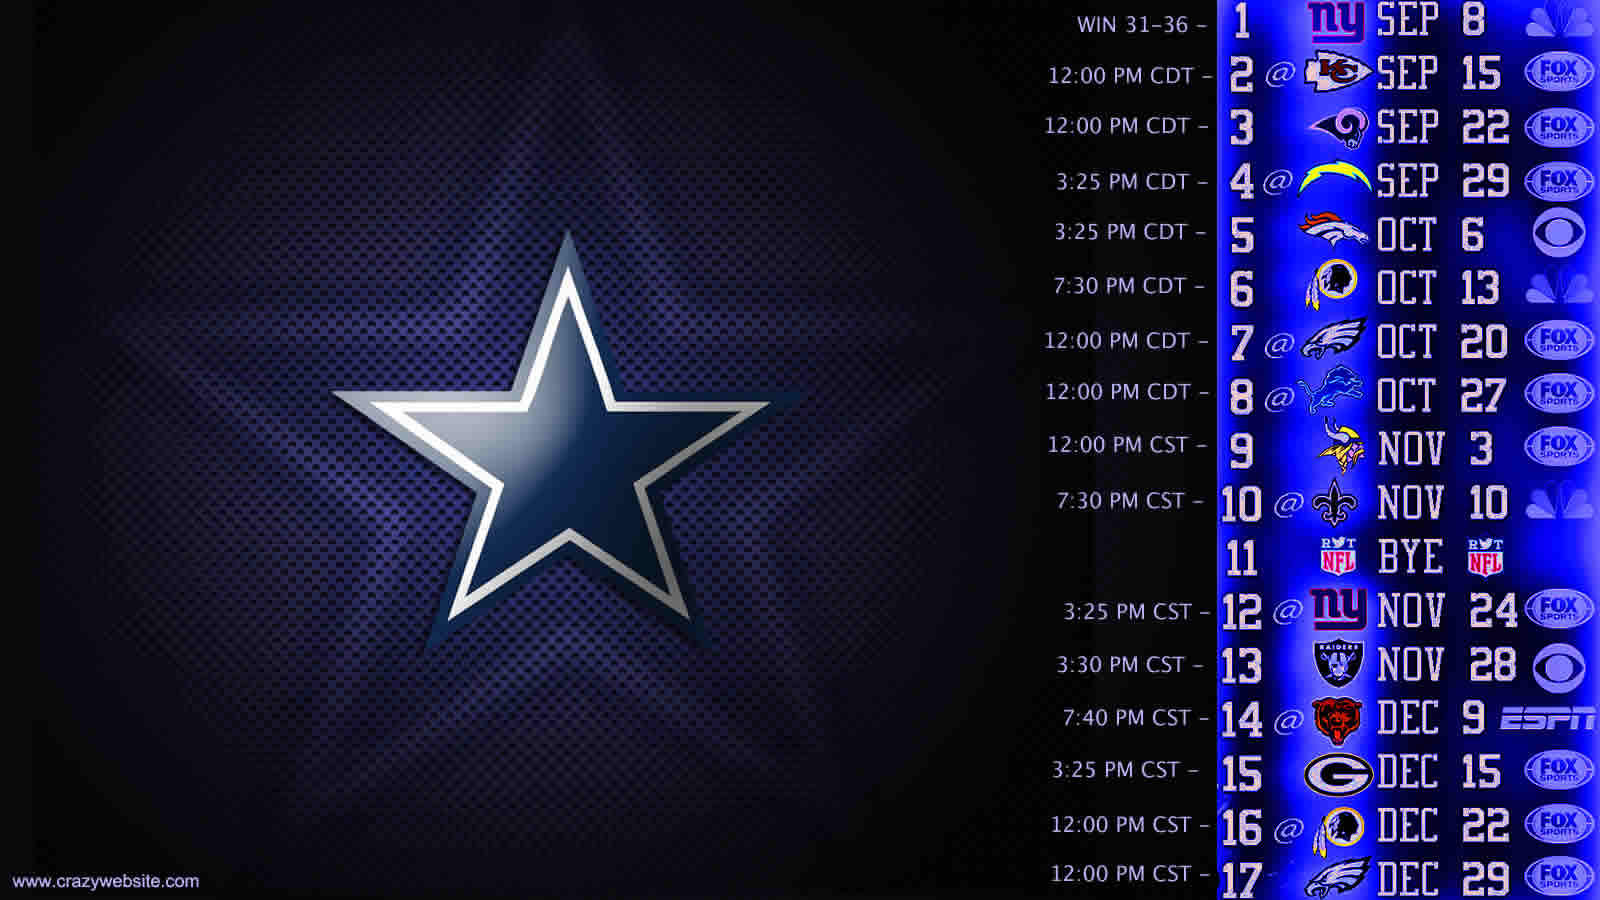 Your Favorite Nfc East Division Nfl Football Team The Dallas Cowboys